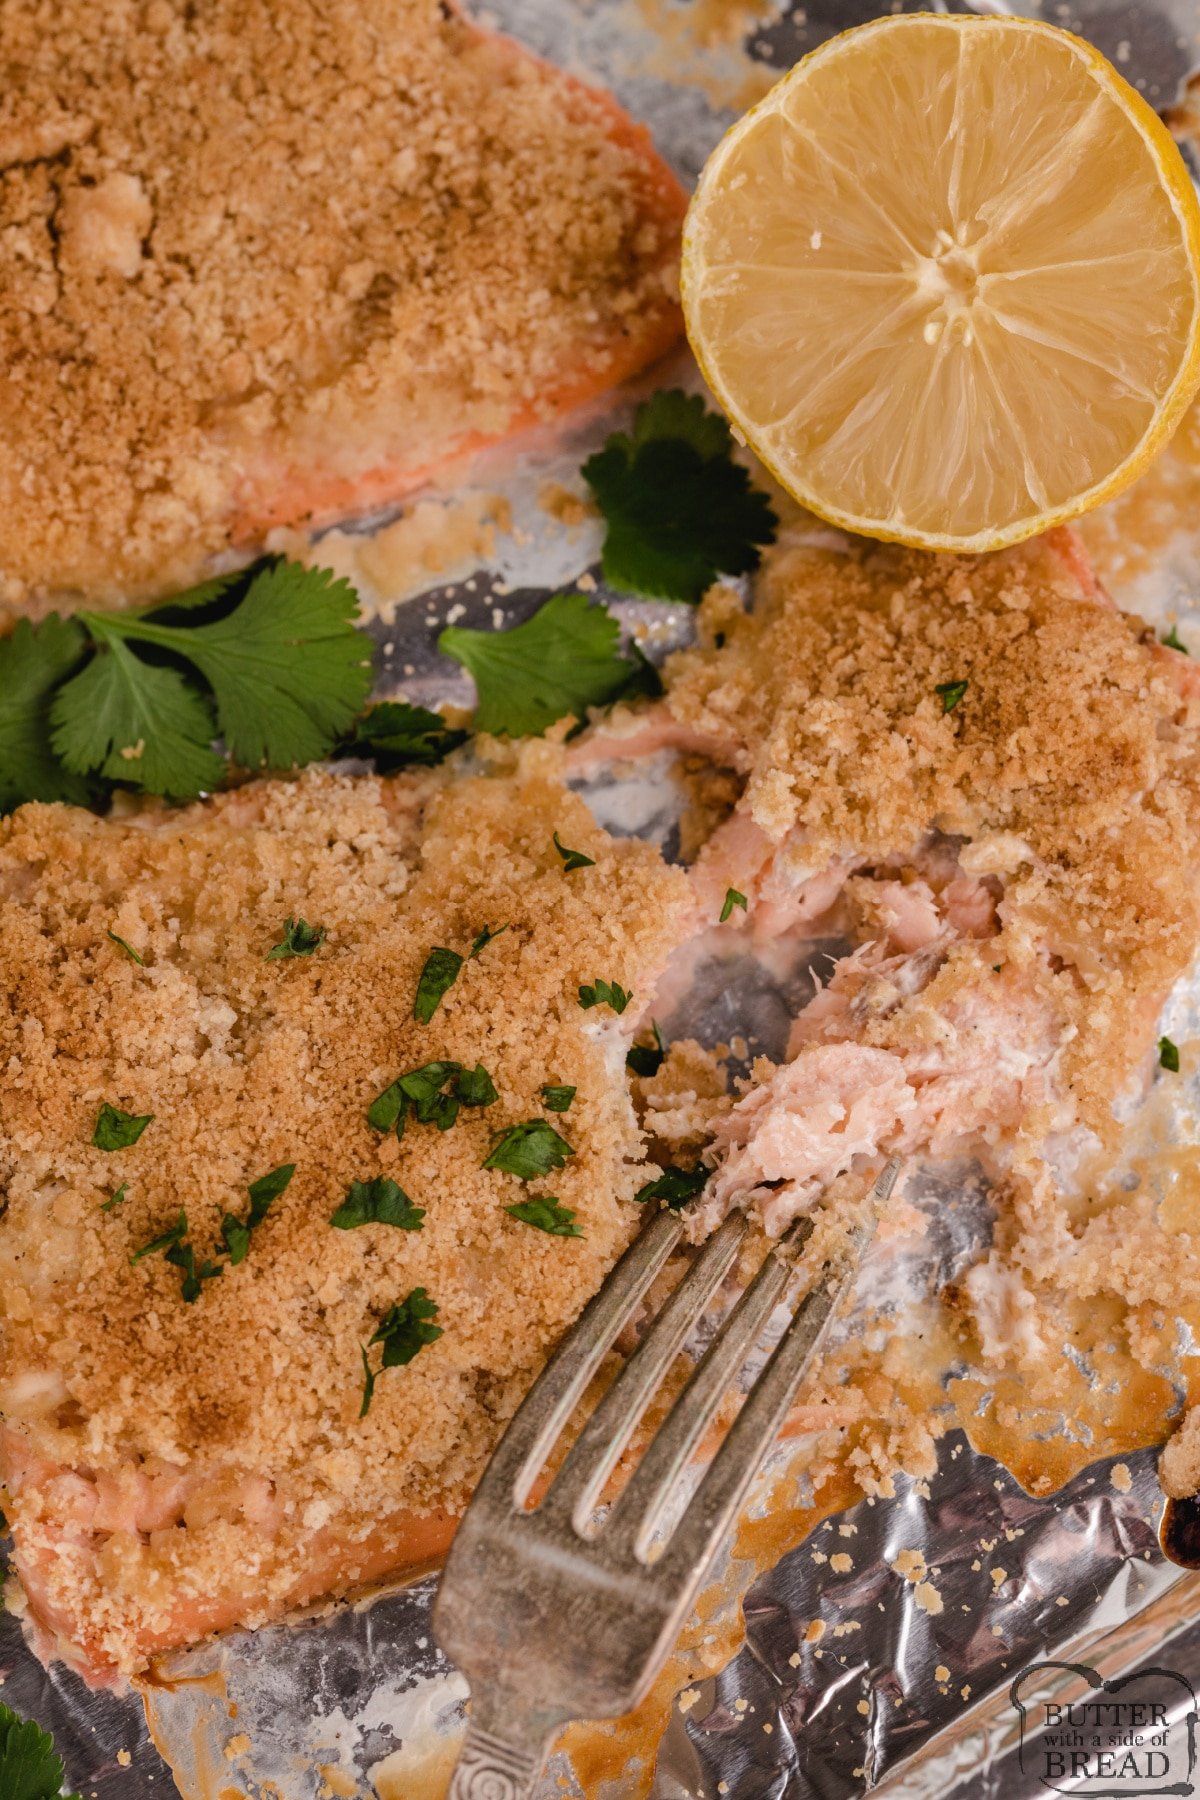 Parmesan Crusted Baked Salmon is moist, flaky, full of flavor and so simple to prepare! Only a few ingredients are needed to make this easy salmon recipe. 